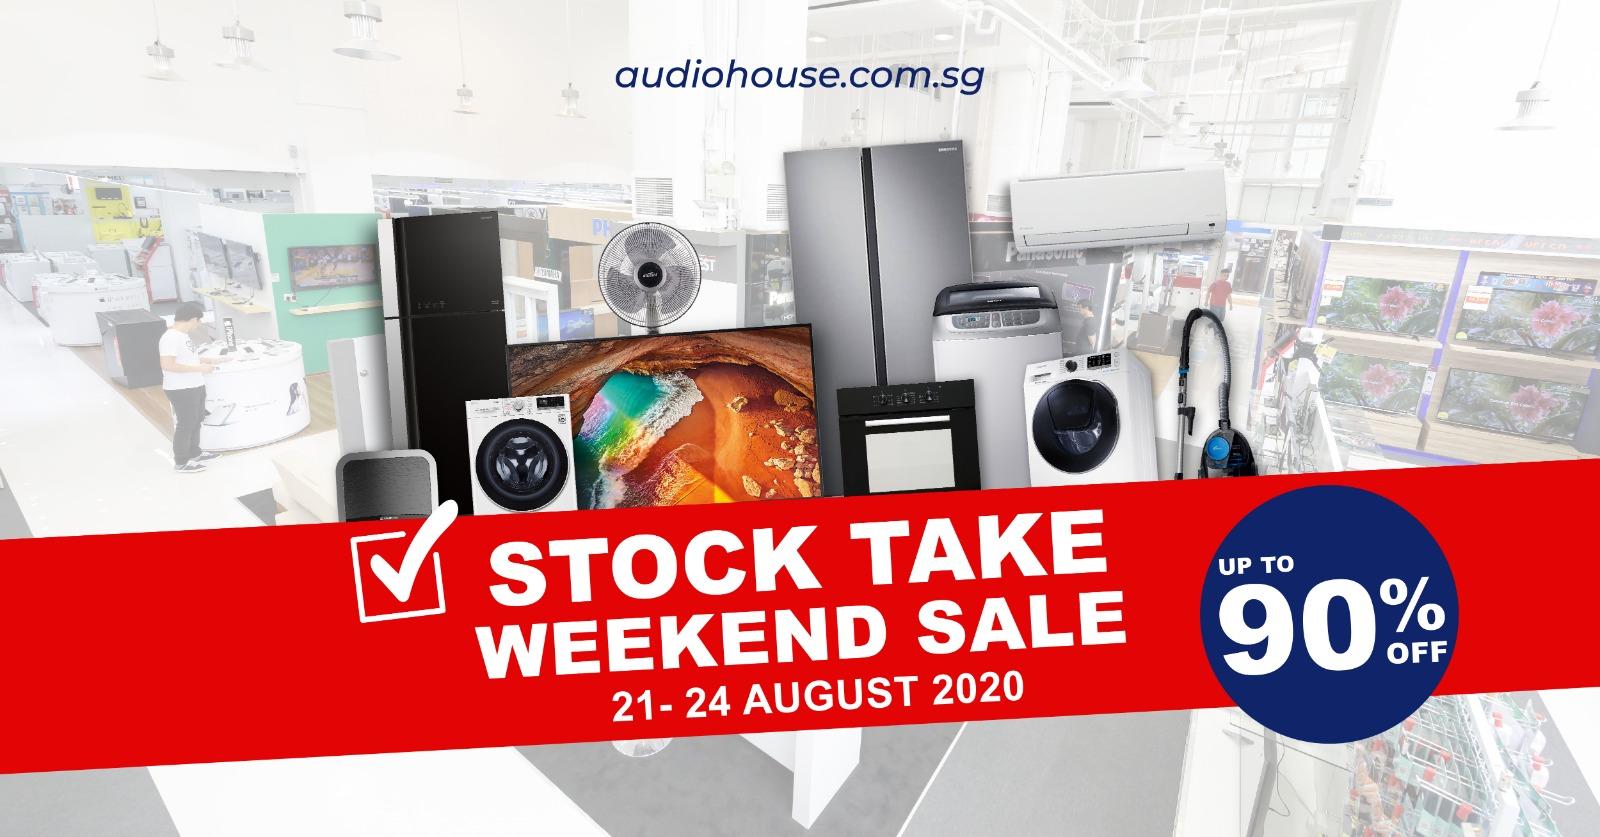 21 to 24 Aug: Stocktake Weekend Sales Up to 90 Percent Off